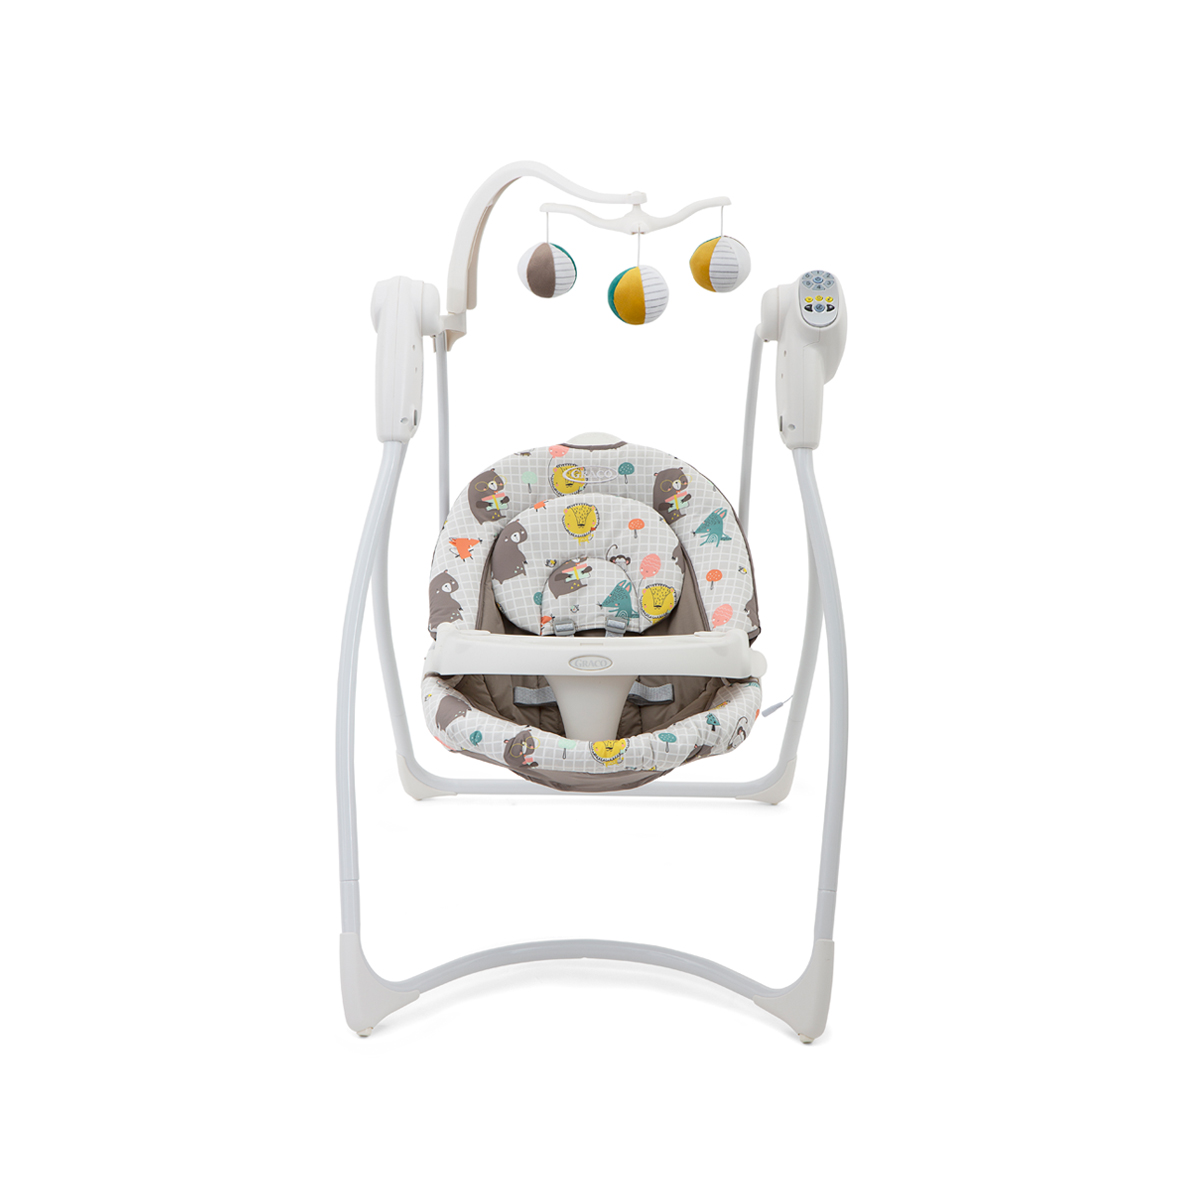 Graco Baby Delight | Graco Baby | Swing Baby Compact